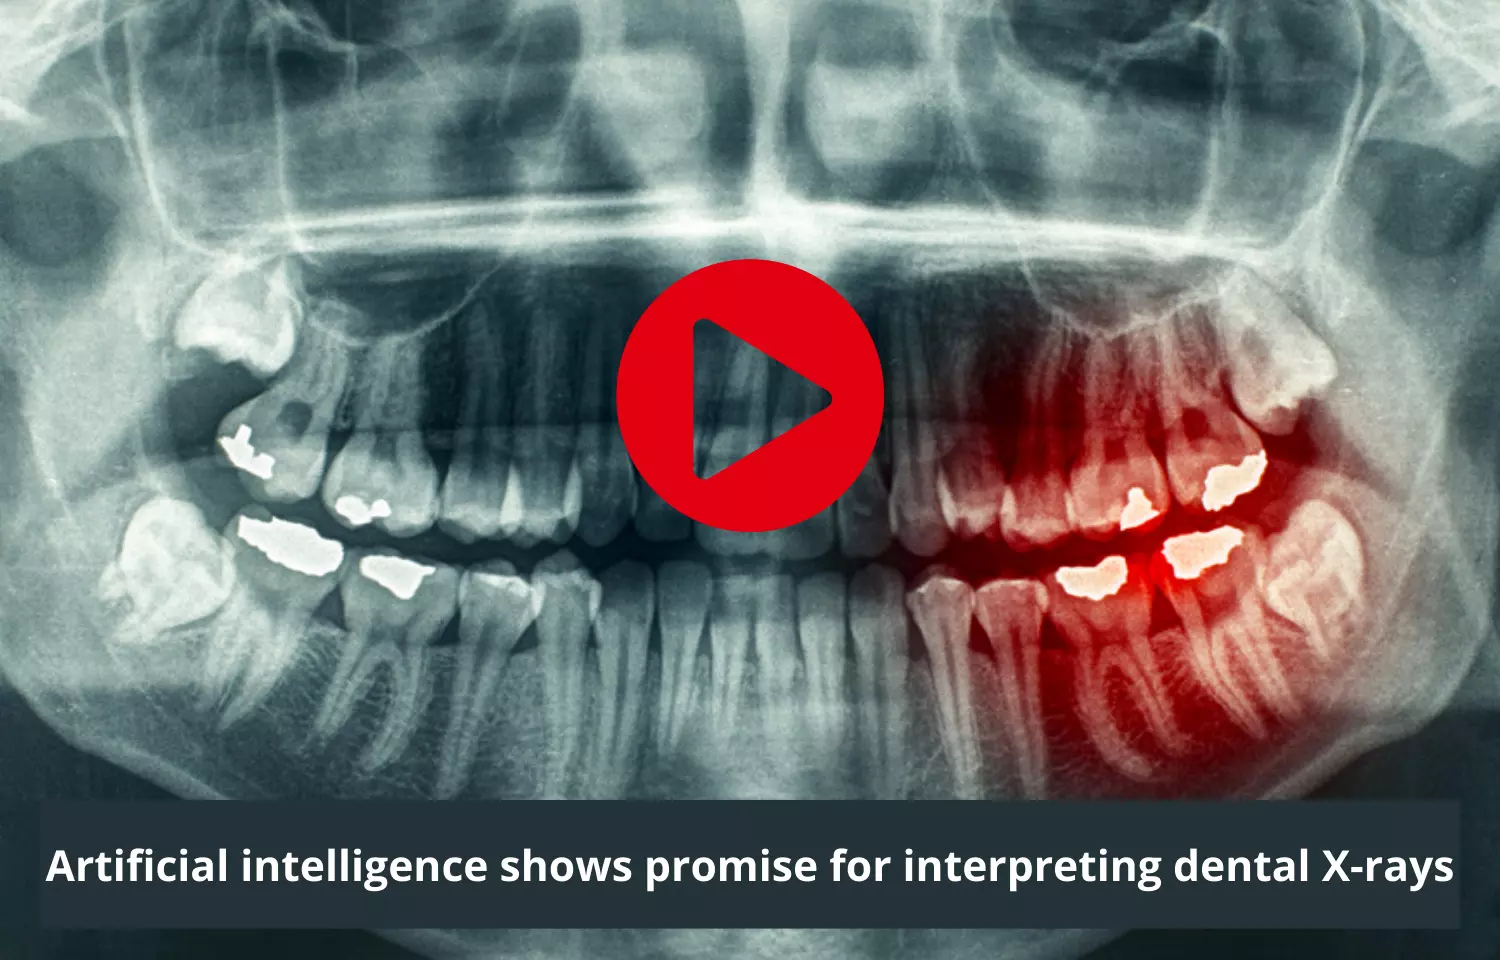 Artificial intelligence shows promise for interpreting dental X-rays